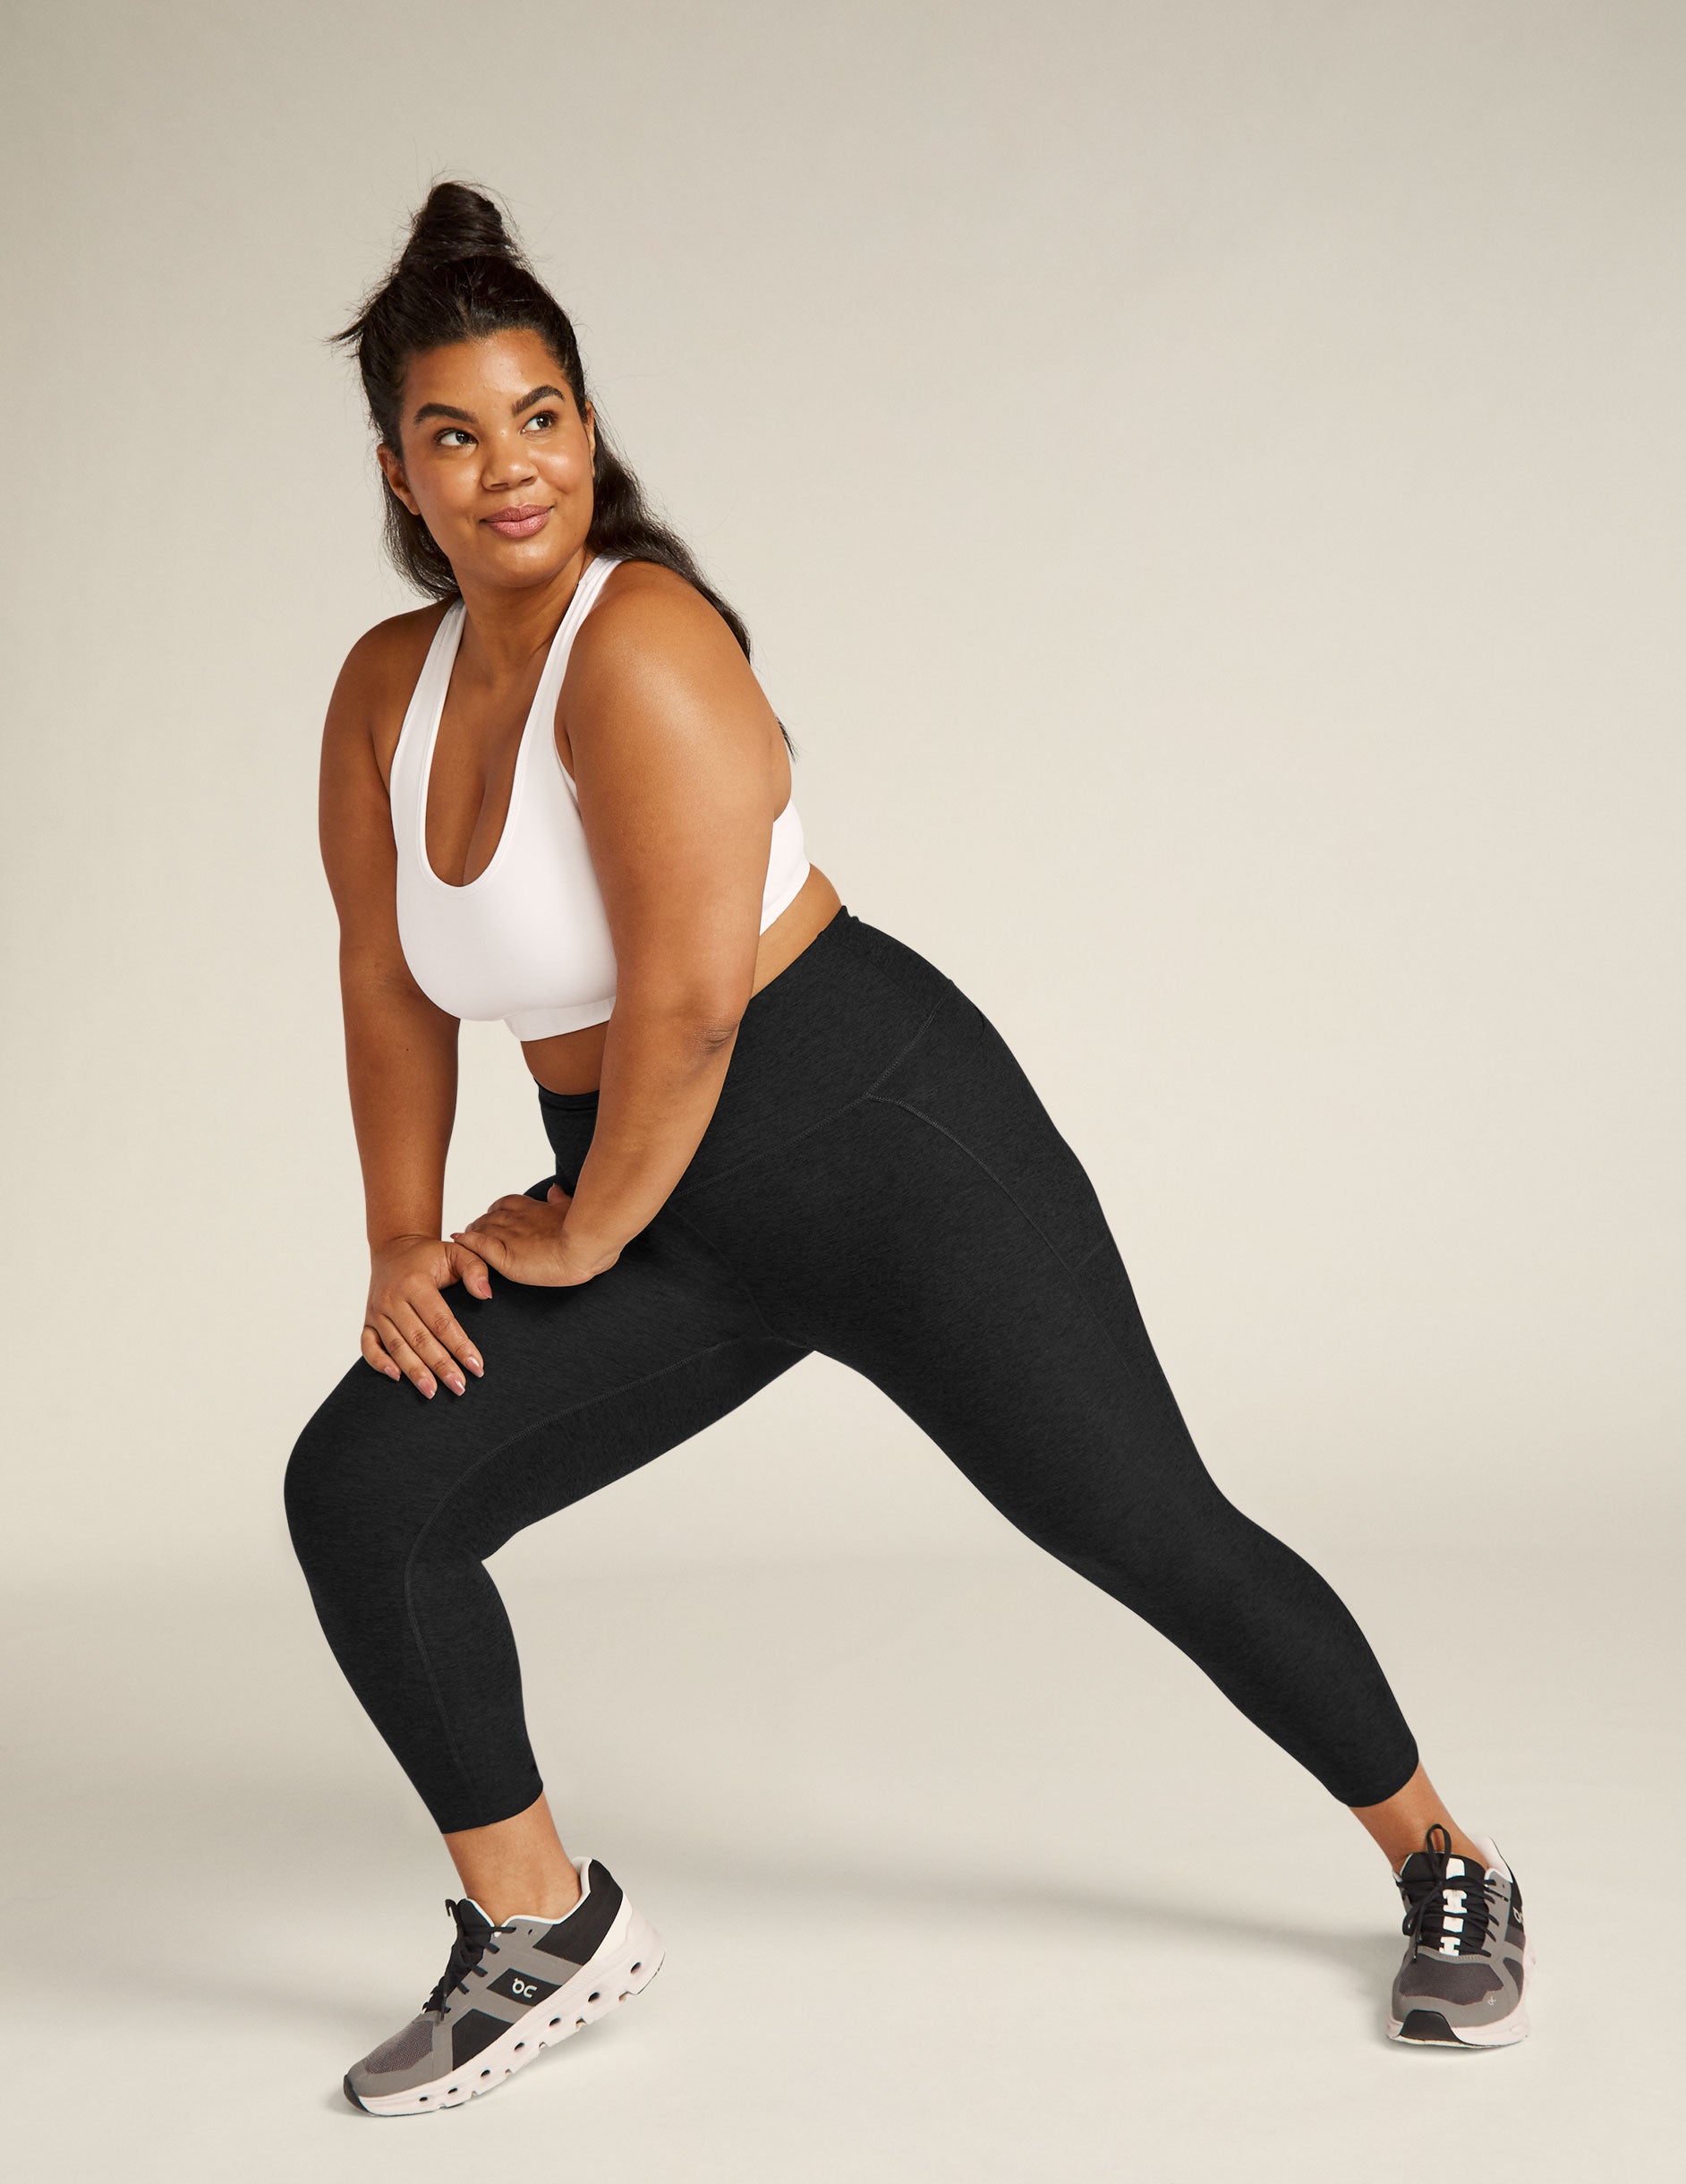 Balance collection leggings | Leggings are not pants, Balance collection,  Leggings